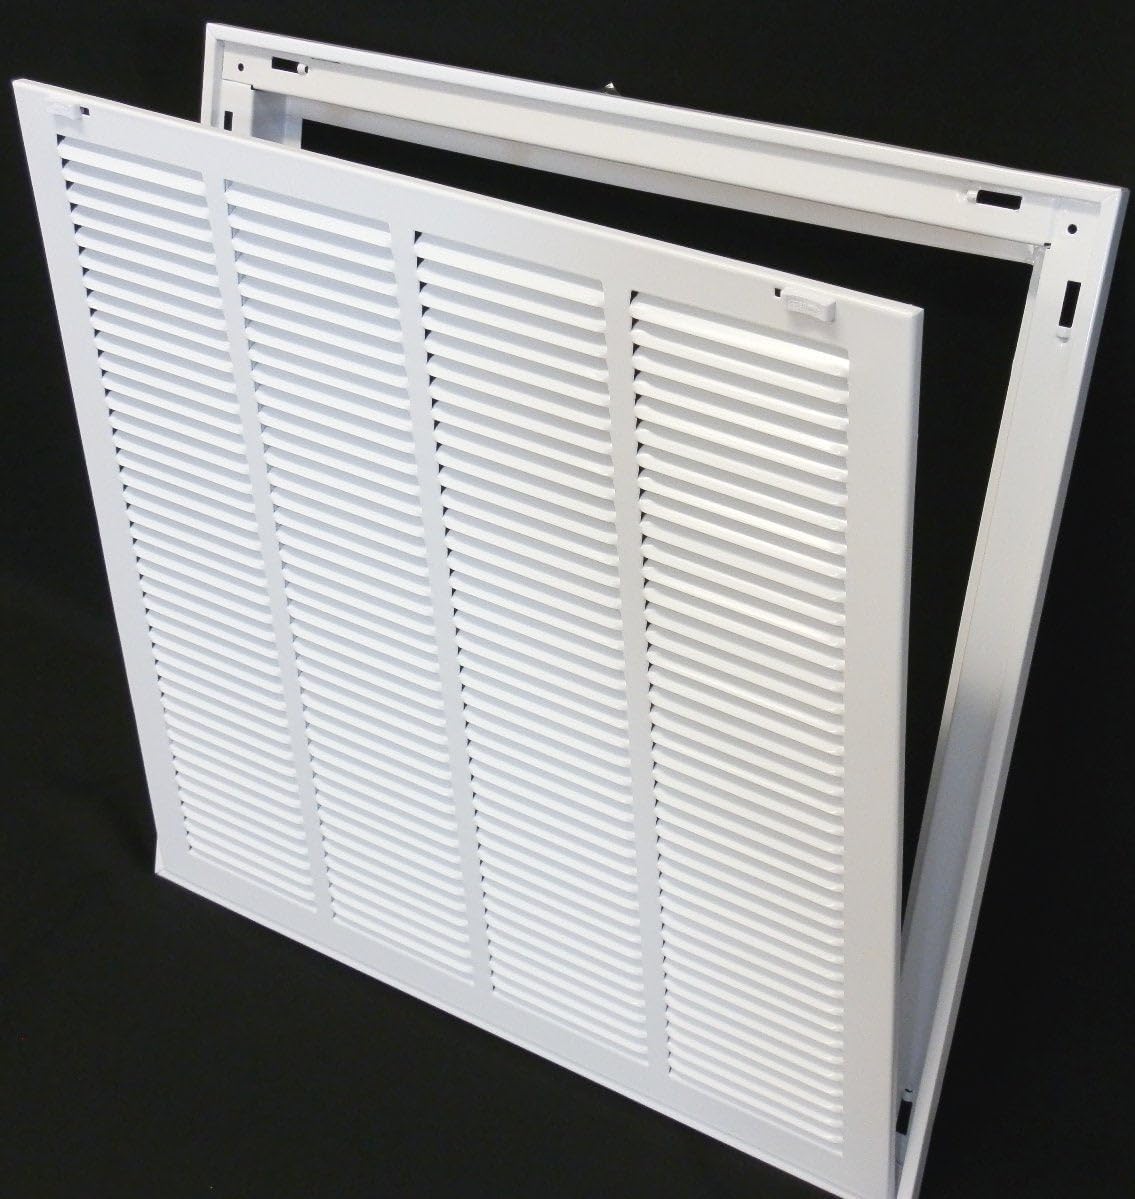 24&quot; X 24&quot; Return Air Filter Grille - Filter Included - Easy Plastic Tabs for Removable Face/Door